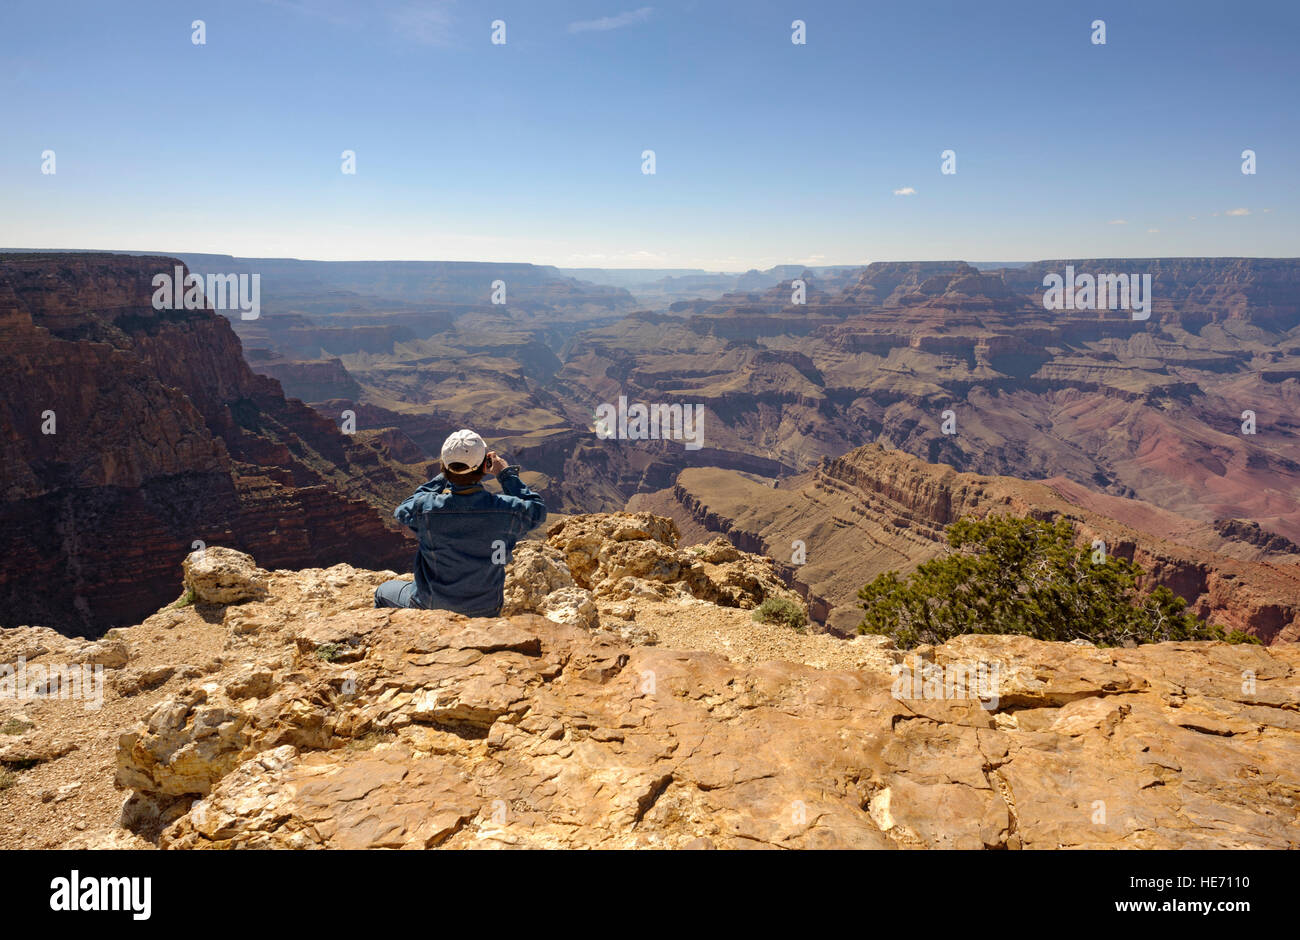 Adventure travel man at edge of the Grand Canyon south rim Pipe Creek Vista taking photo, Arizona USA rear view looking out over majestic Grand Canyon Stock Photo